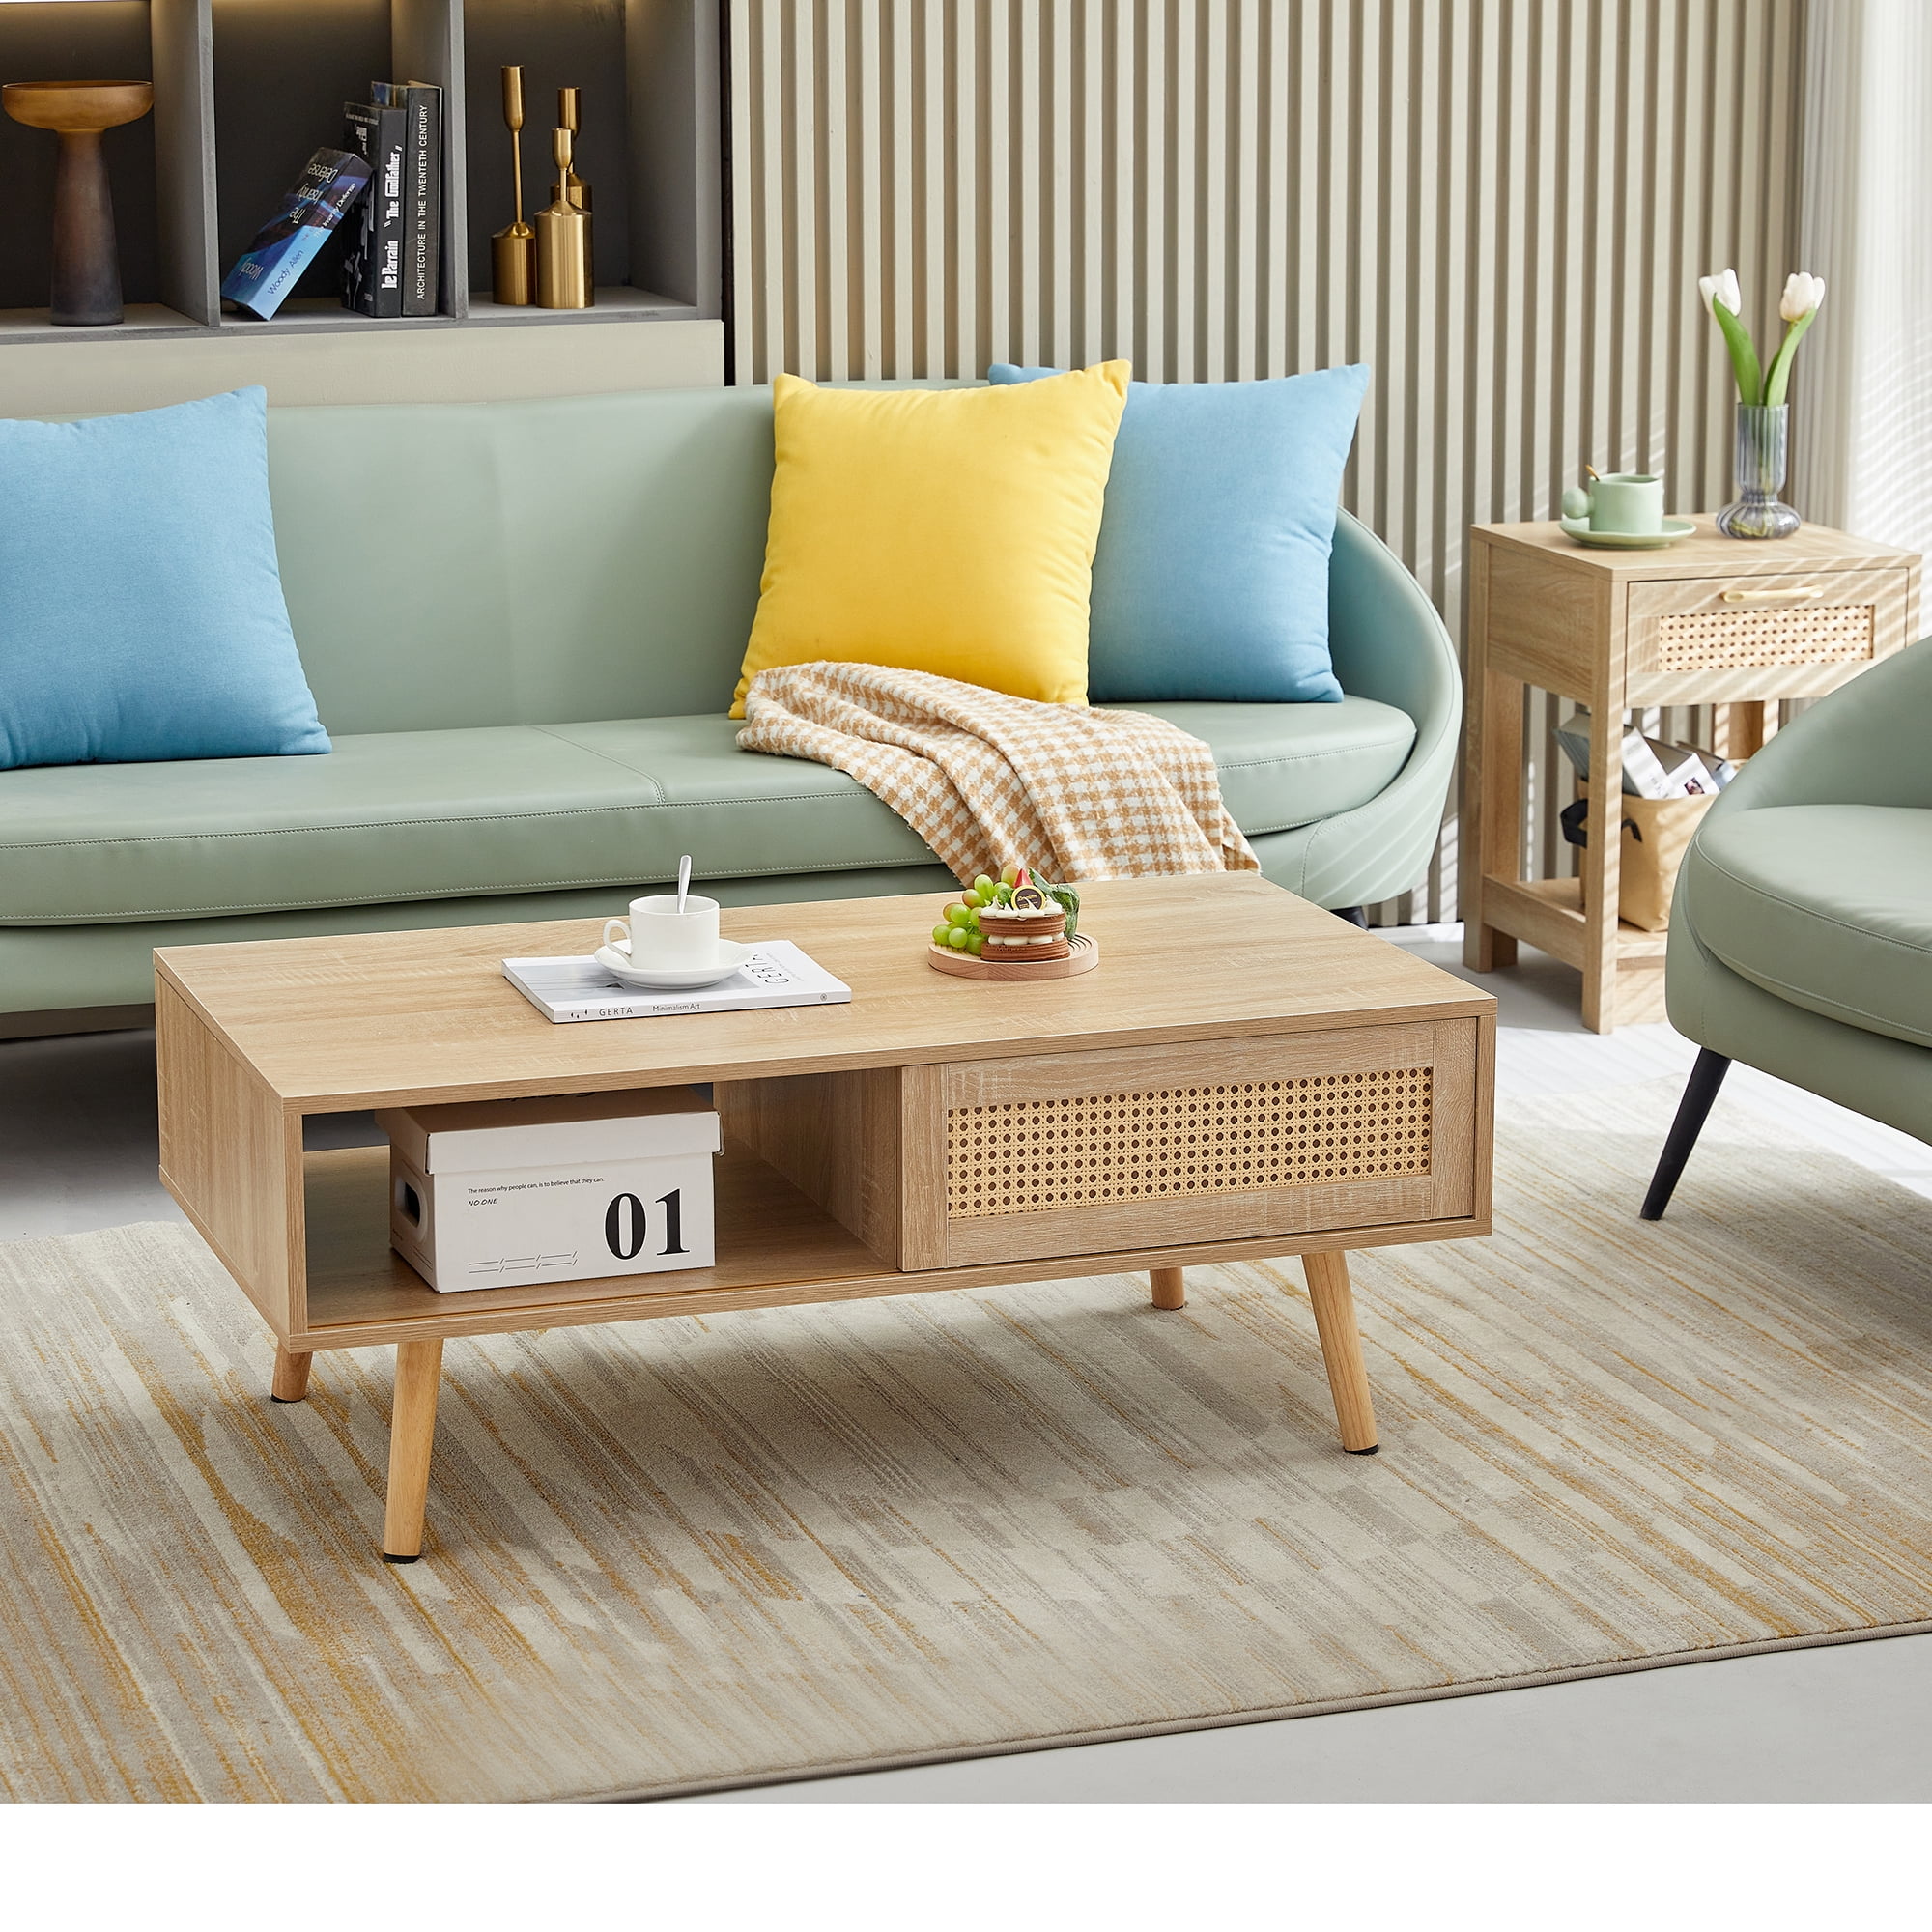 Tansole Rattan Coffee Table with Sliding Storage Door, Solid Wood Legs - Ideal for Living Rooms